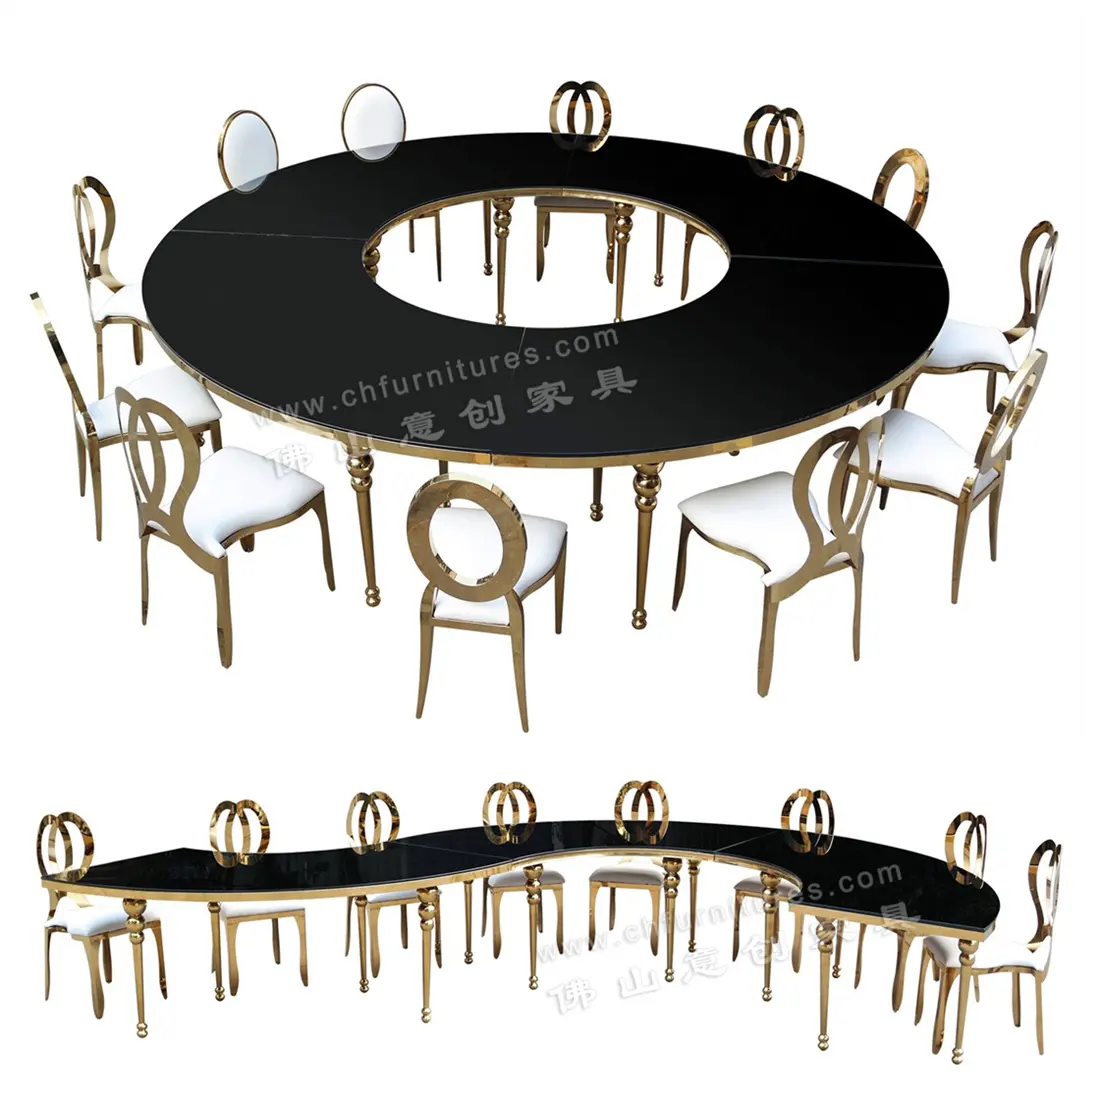 Half Moon Style Glass Dining Table Gold Stainless Steel Wedding Banquet Tables Circle